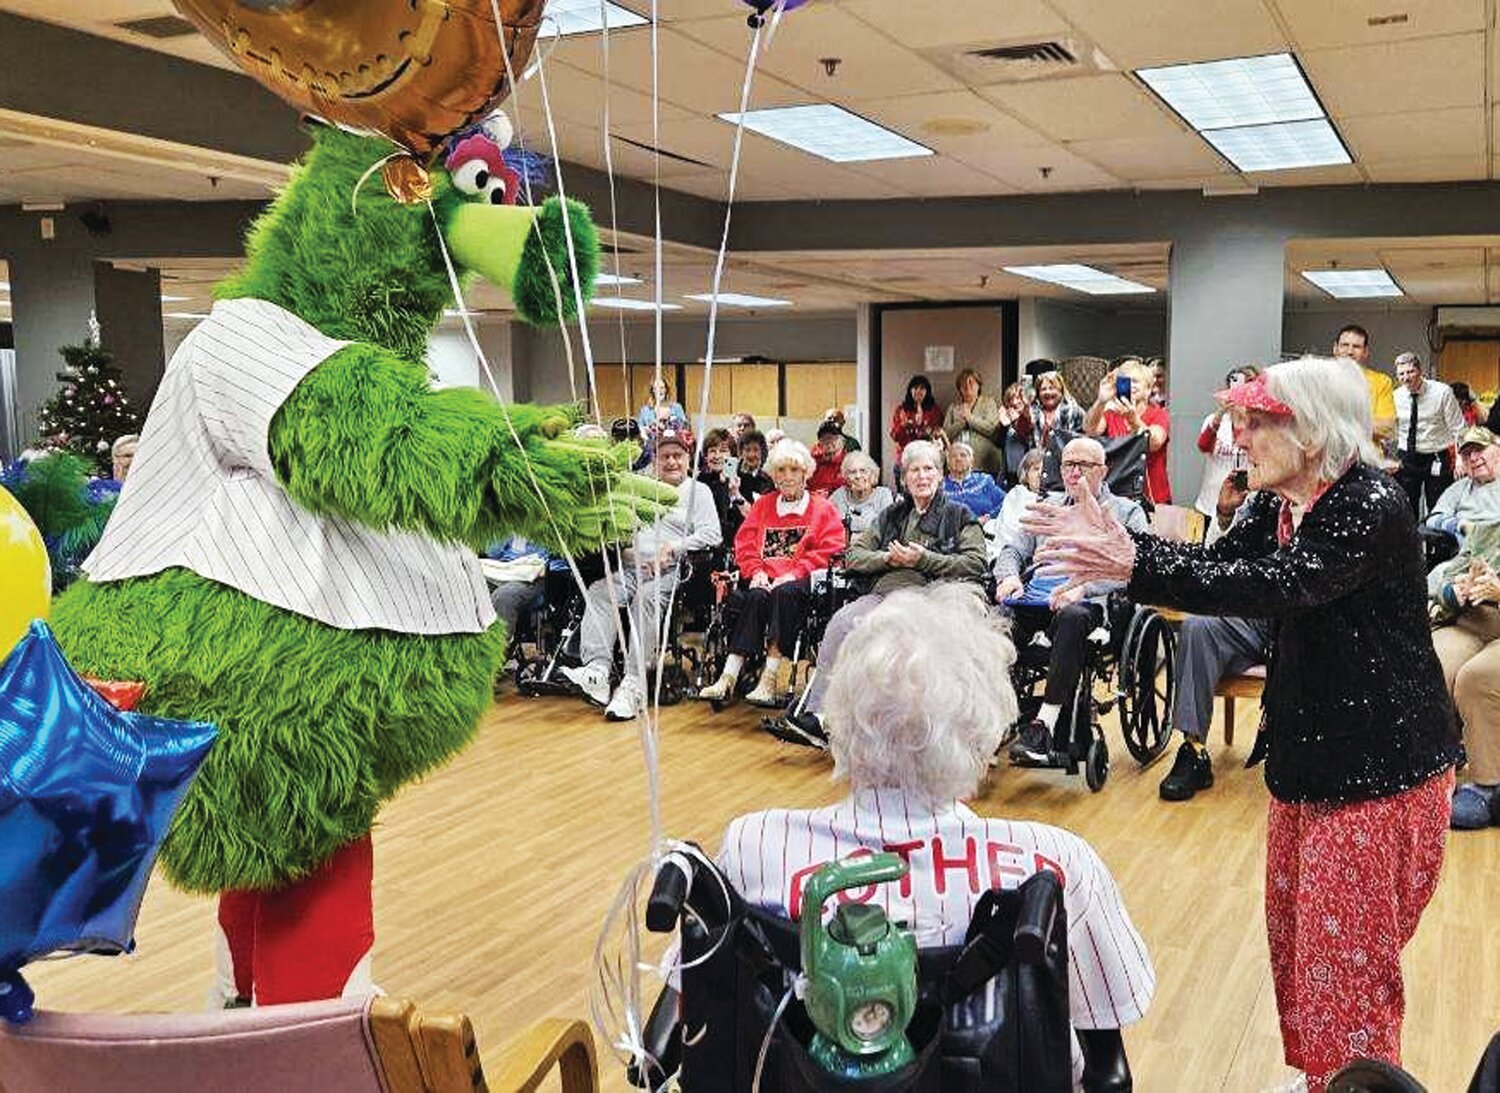 Ann Nieswander takes to the dance floor with the Phillie Phanatic at Neshaminy Manor this month to mark her 103rd birthday. Two other residents also reached the remarkable milestone this year.